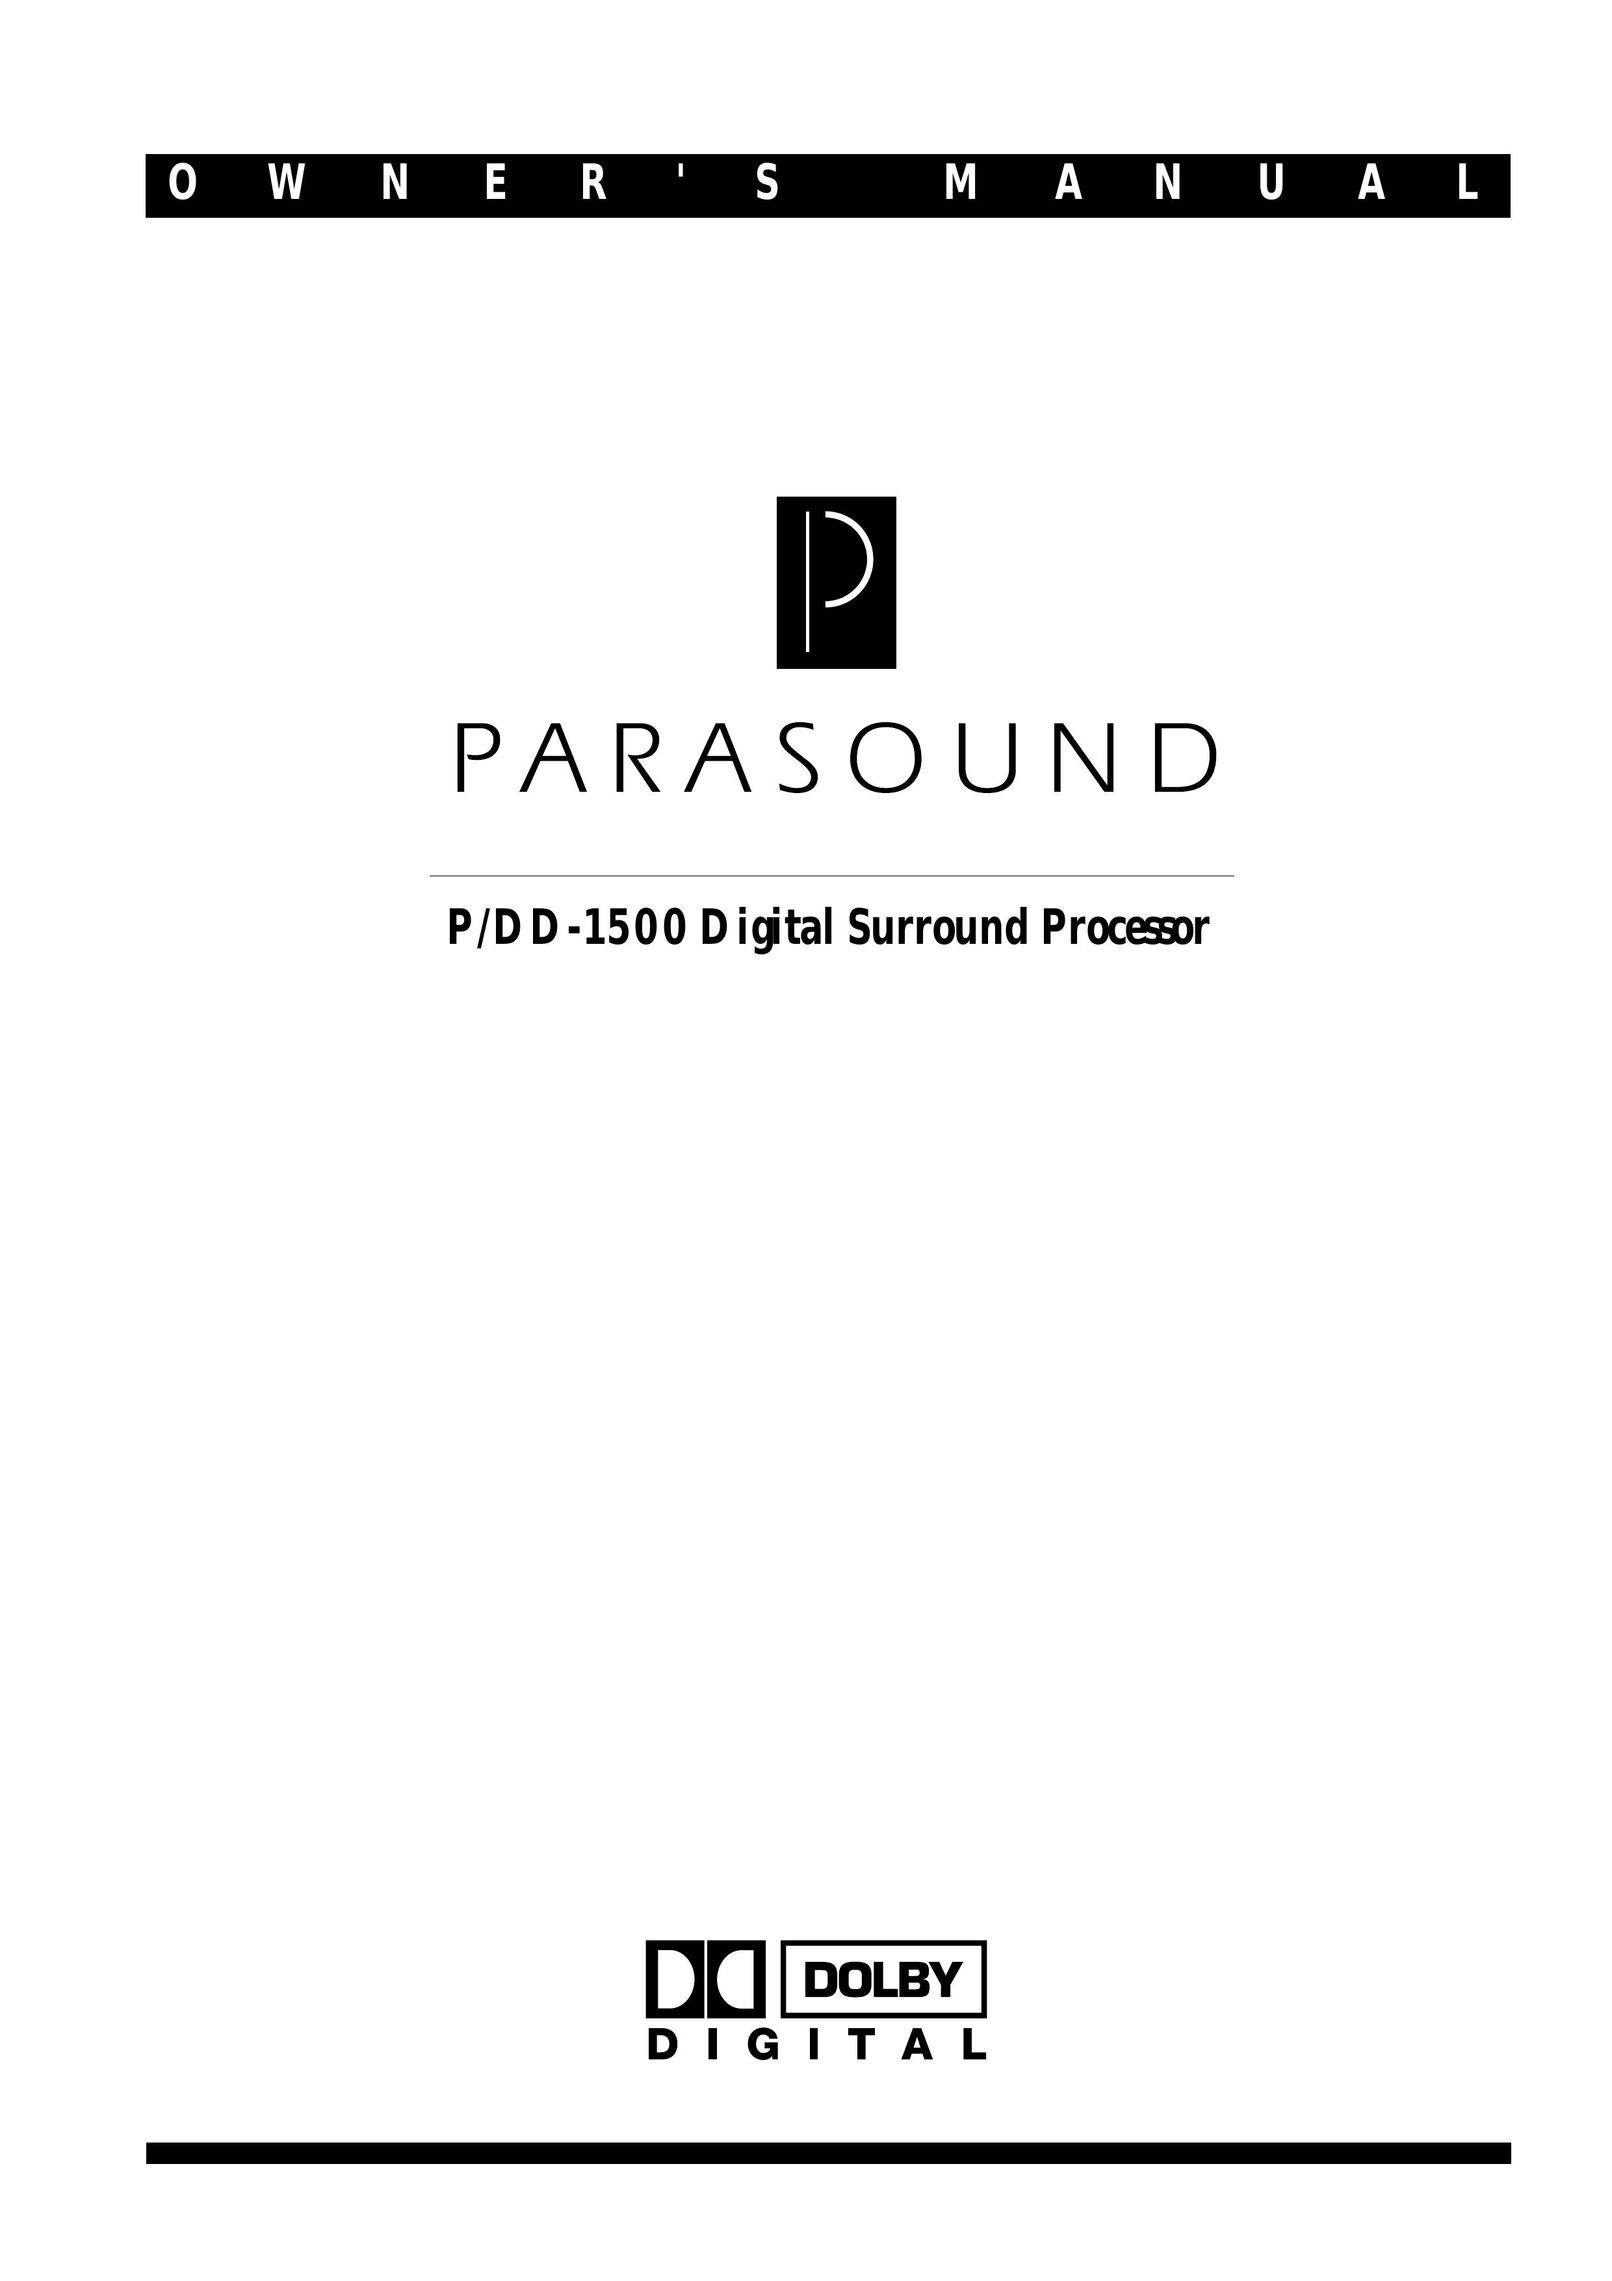 Parasound P/DD-1500 Home Theater System User Manual